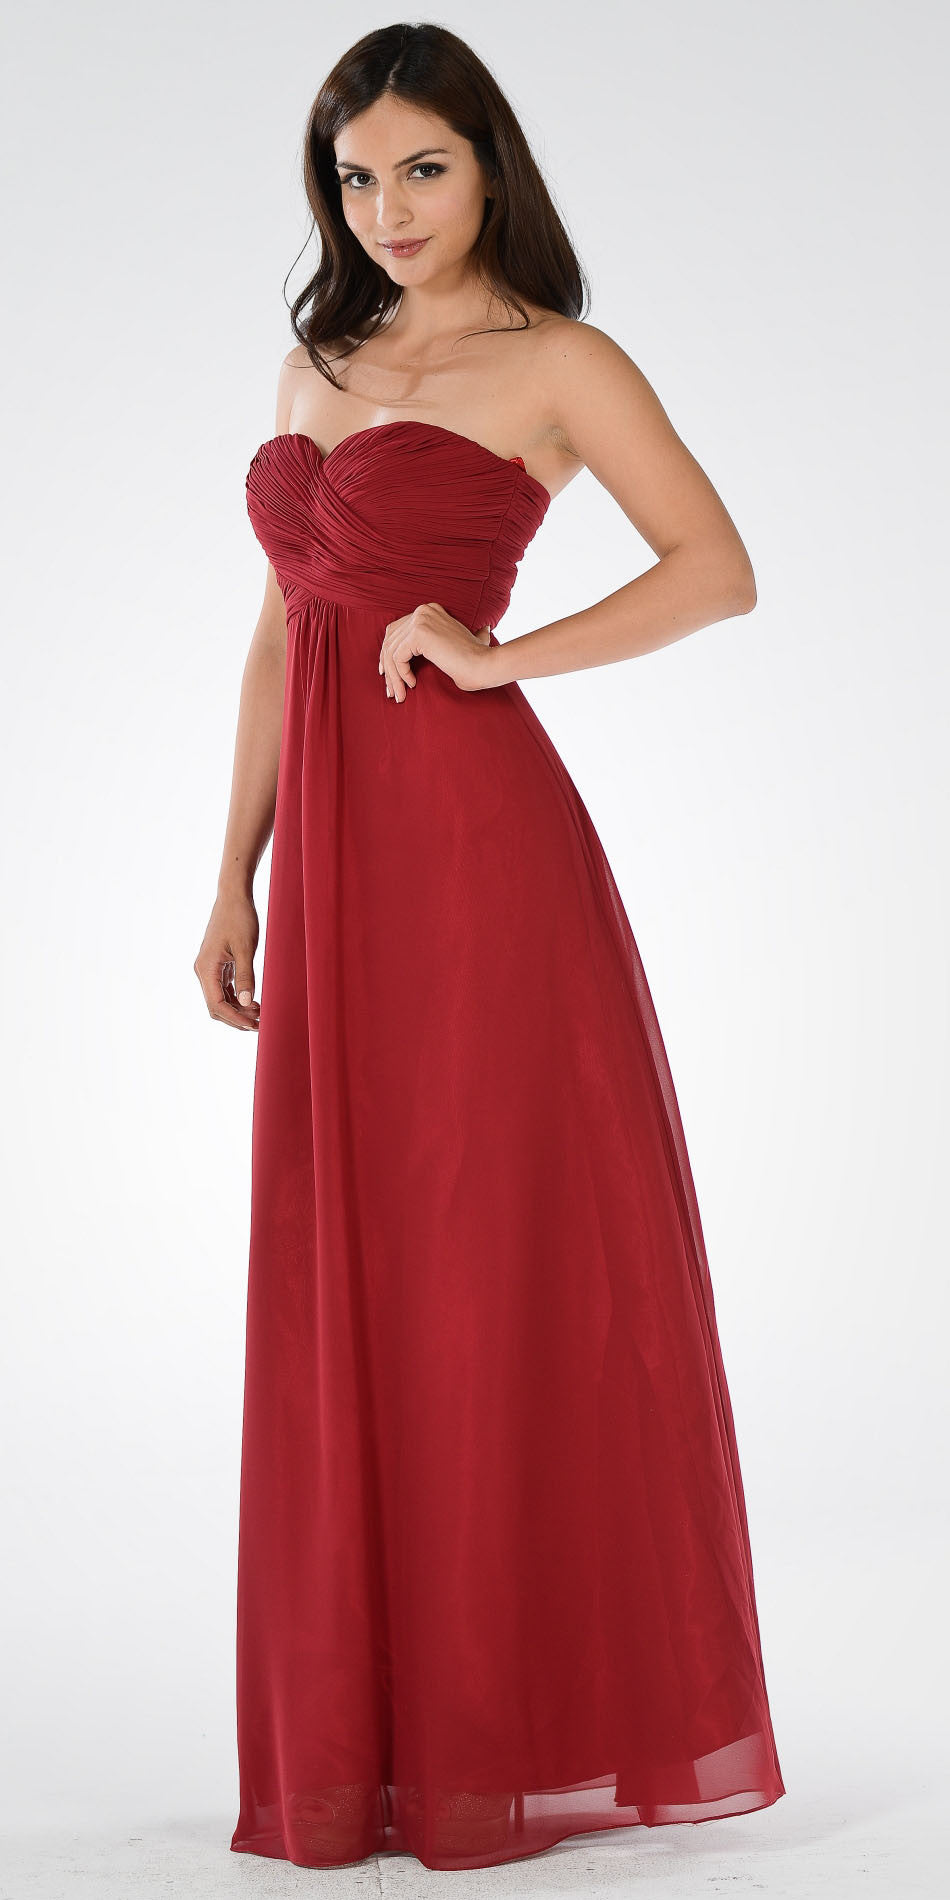 Sweetheart Strapless Ruched Bodice Lace Up Back Long Bridesmaids Dress Burgundy